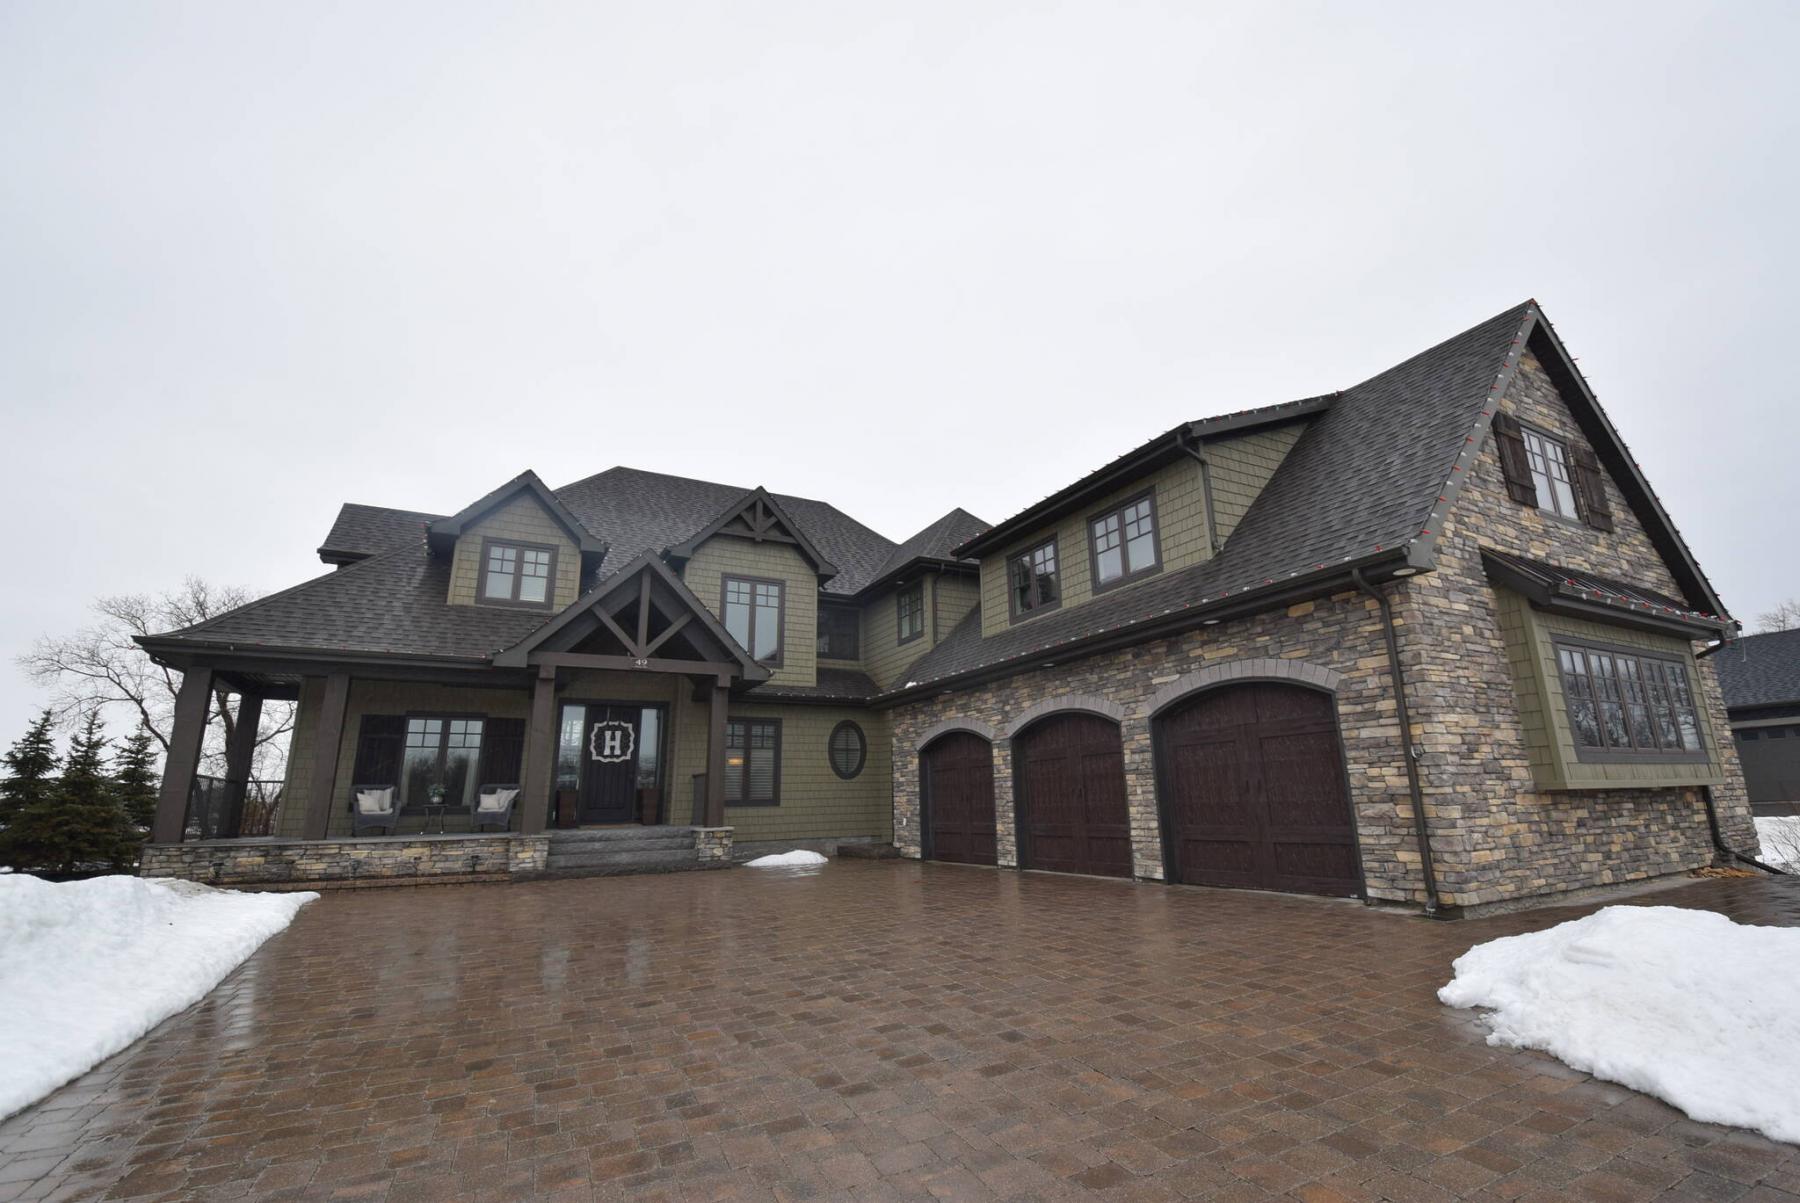 <p>Photos by Todd Lewys / Winnipeg Free Press</p><p>The home&rsquo;s impeccable design starts with a countrified Hardie board, cultured stone and cedar shake exterior that ties in beautifully with the home&rsquo;s countrified surroundings.</p>